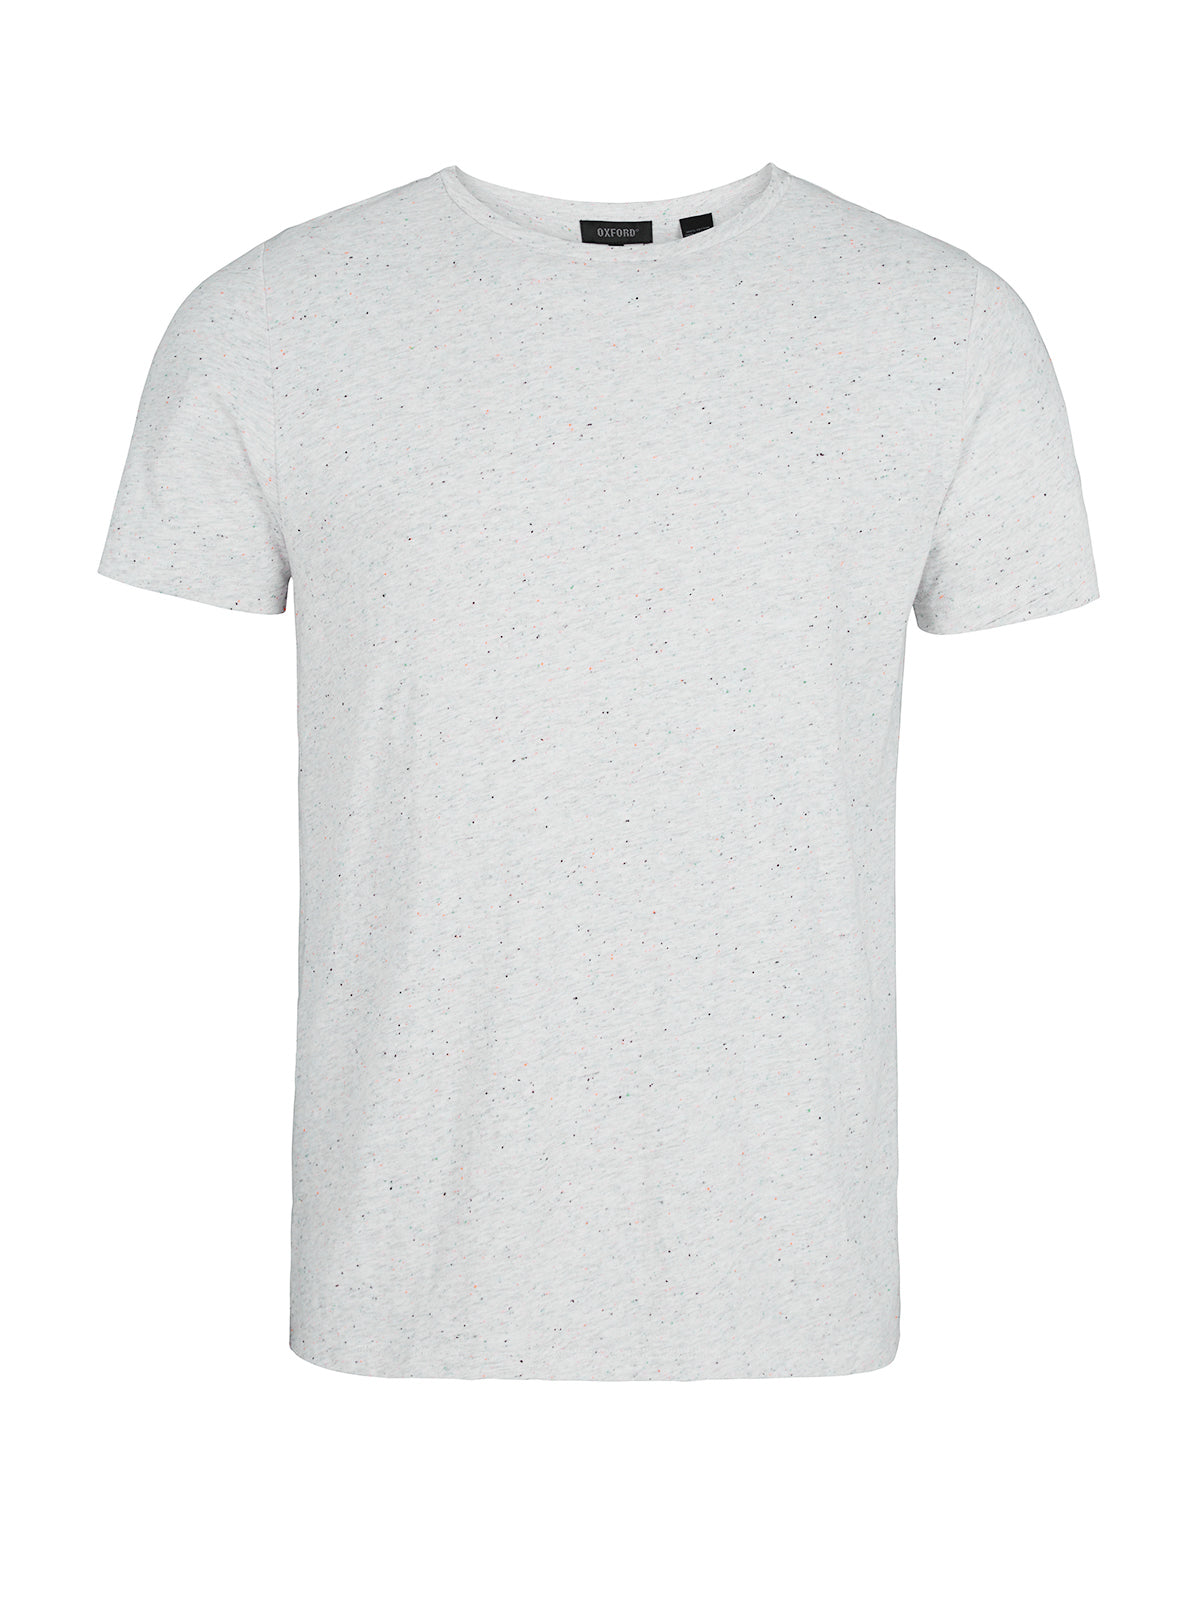 EASTON DONEGAL T-SHIRT GREY